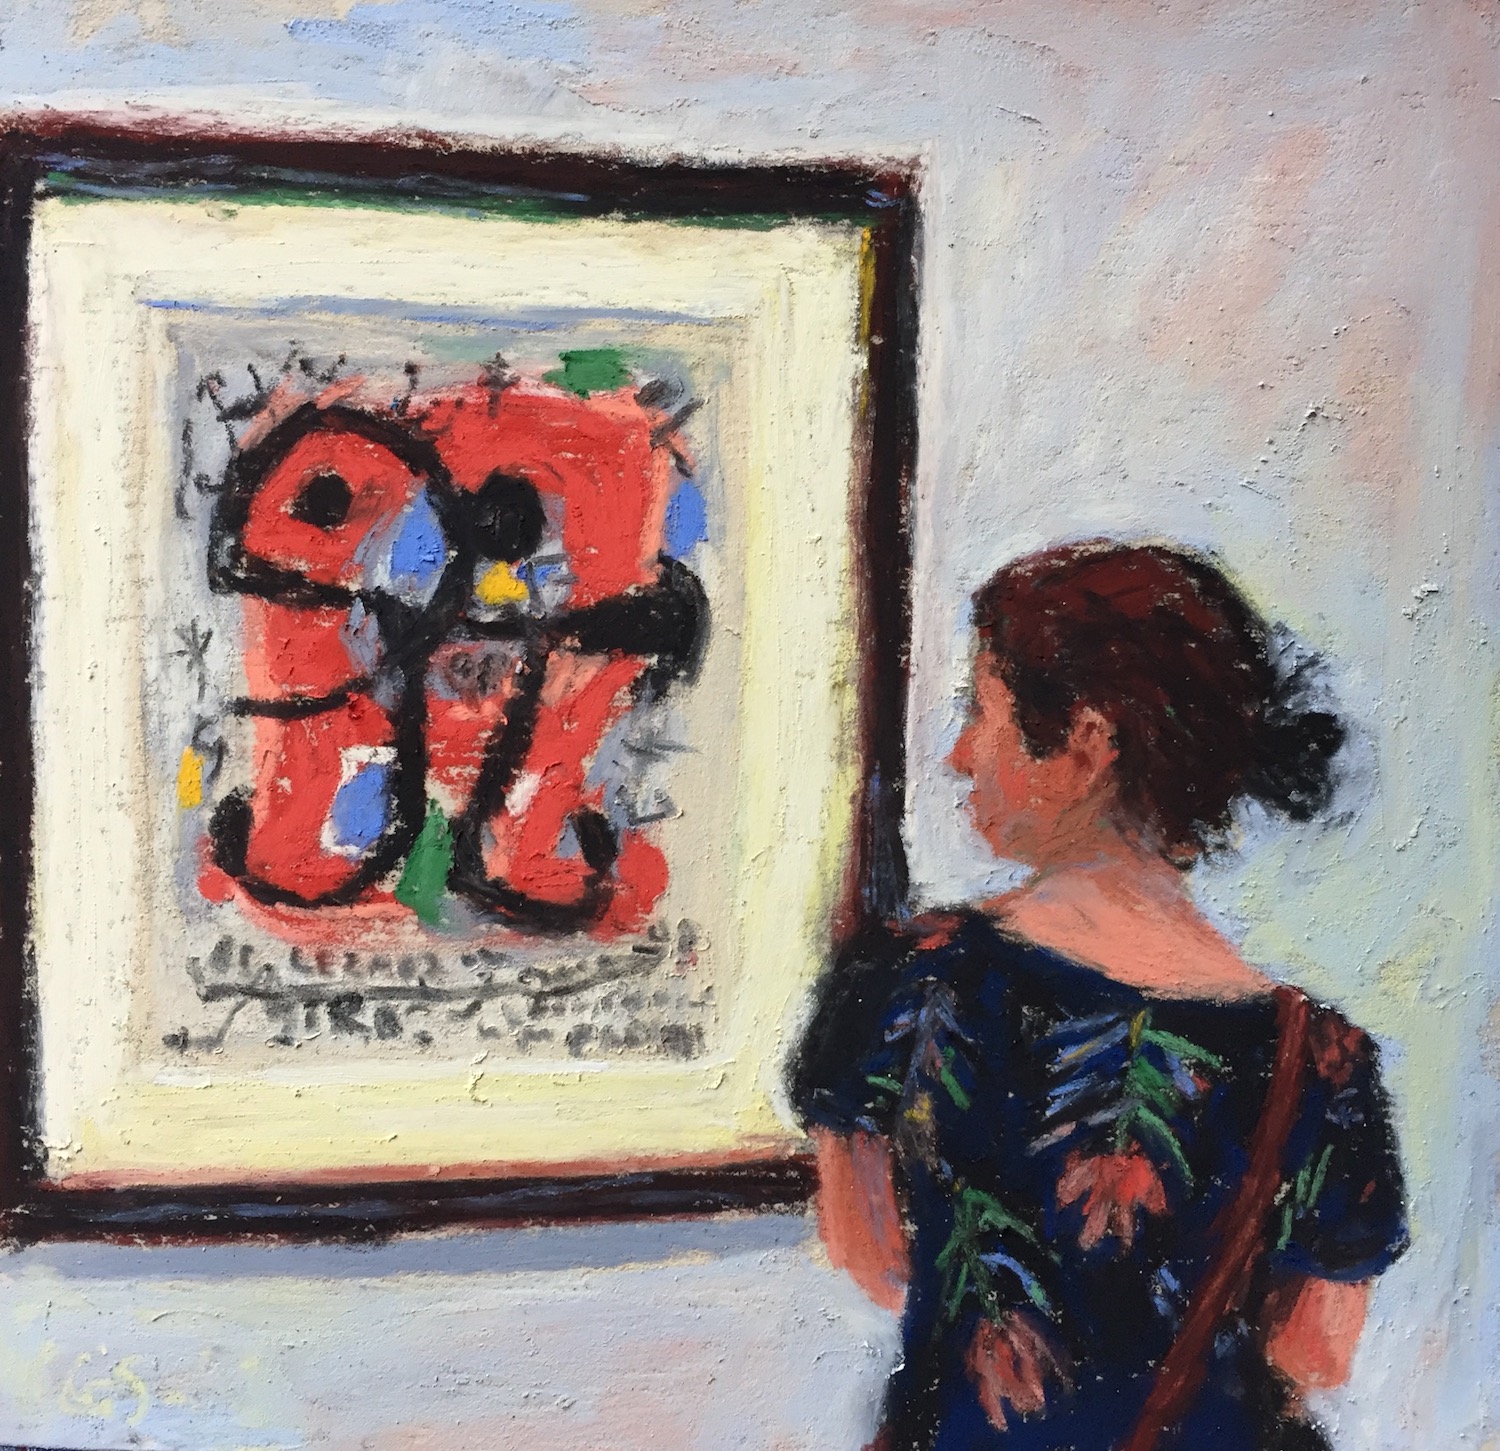 Doing the work: Day 21 "Pondering Miro," Unison pastels on UART 500 paper, 6 x 6 in